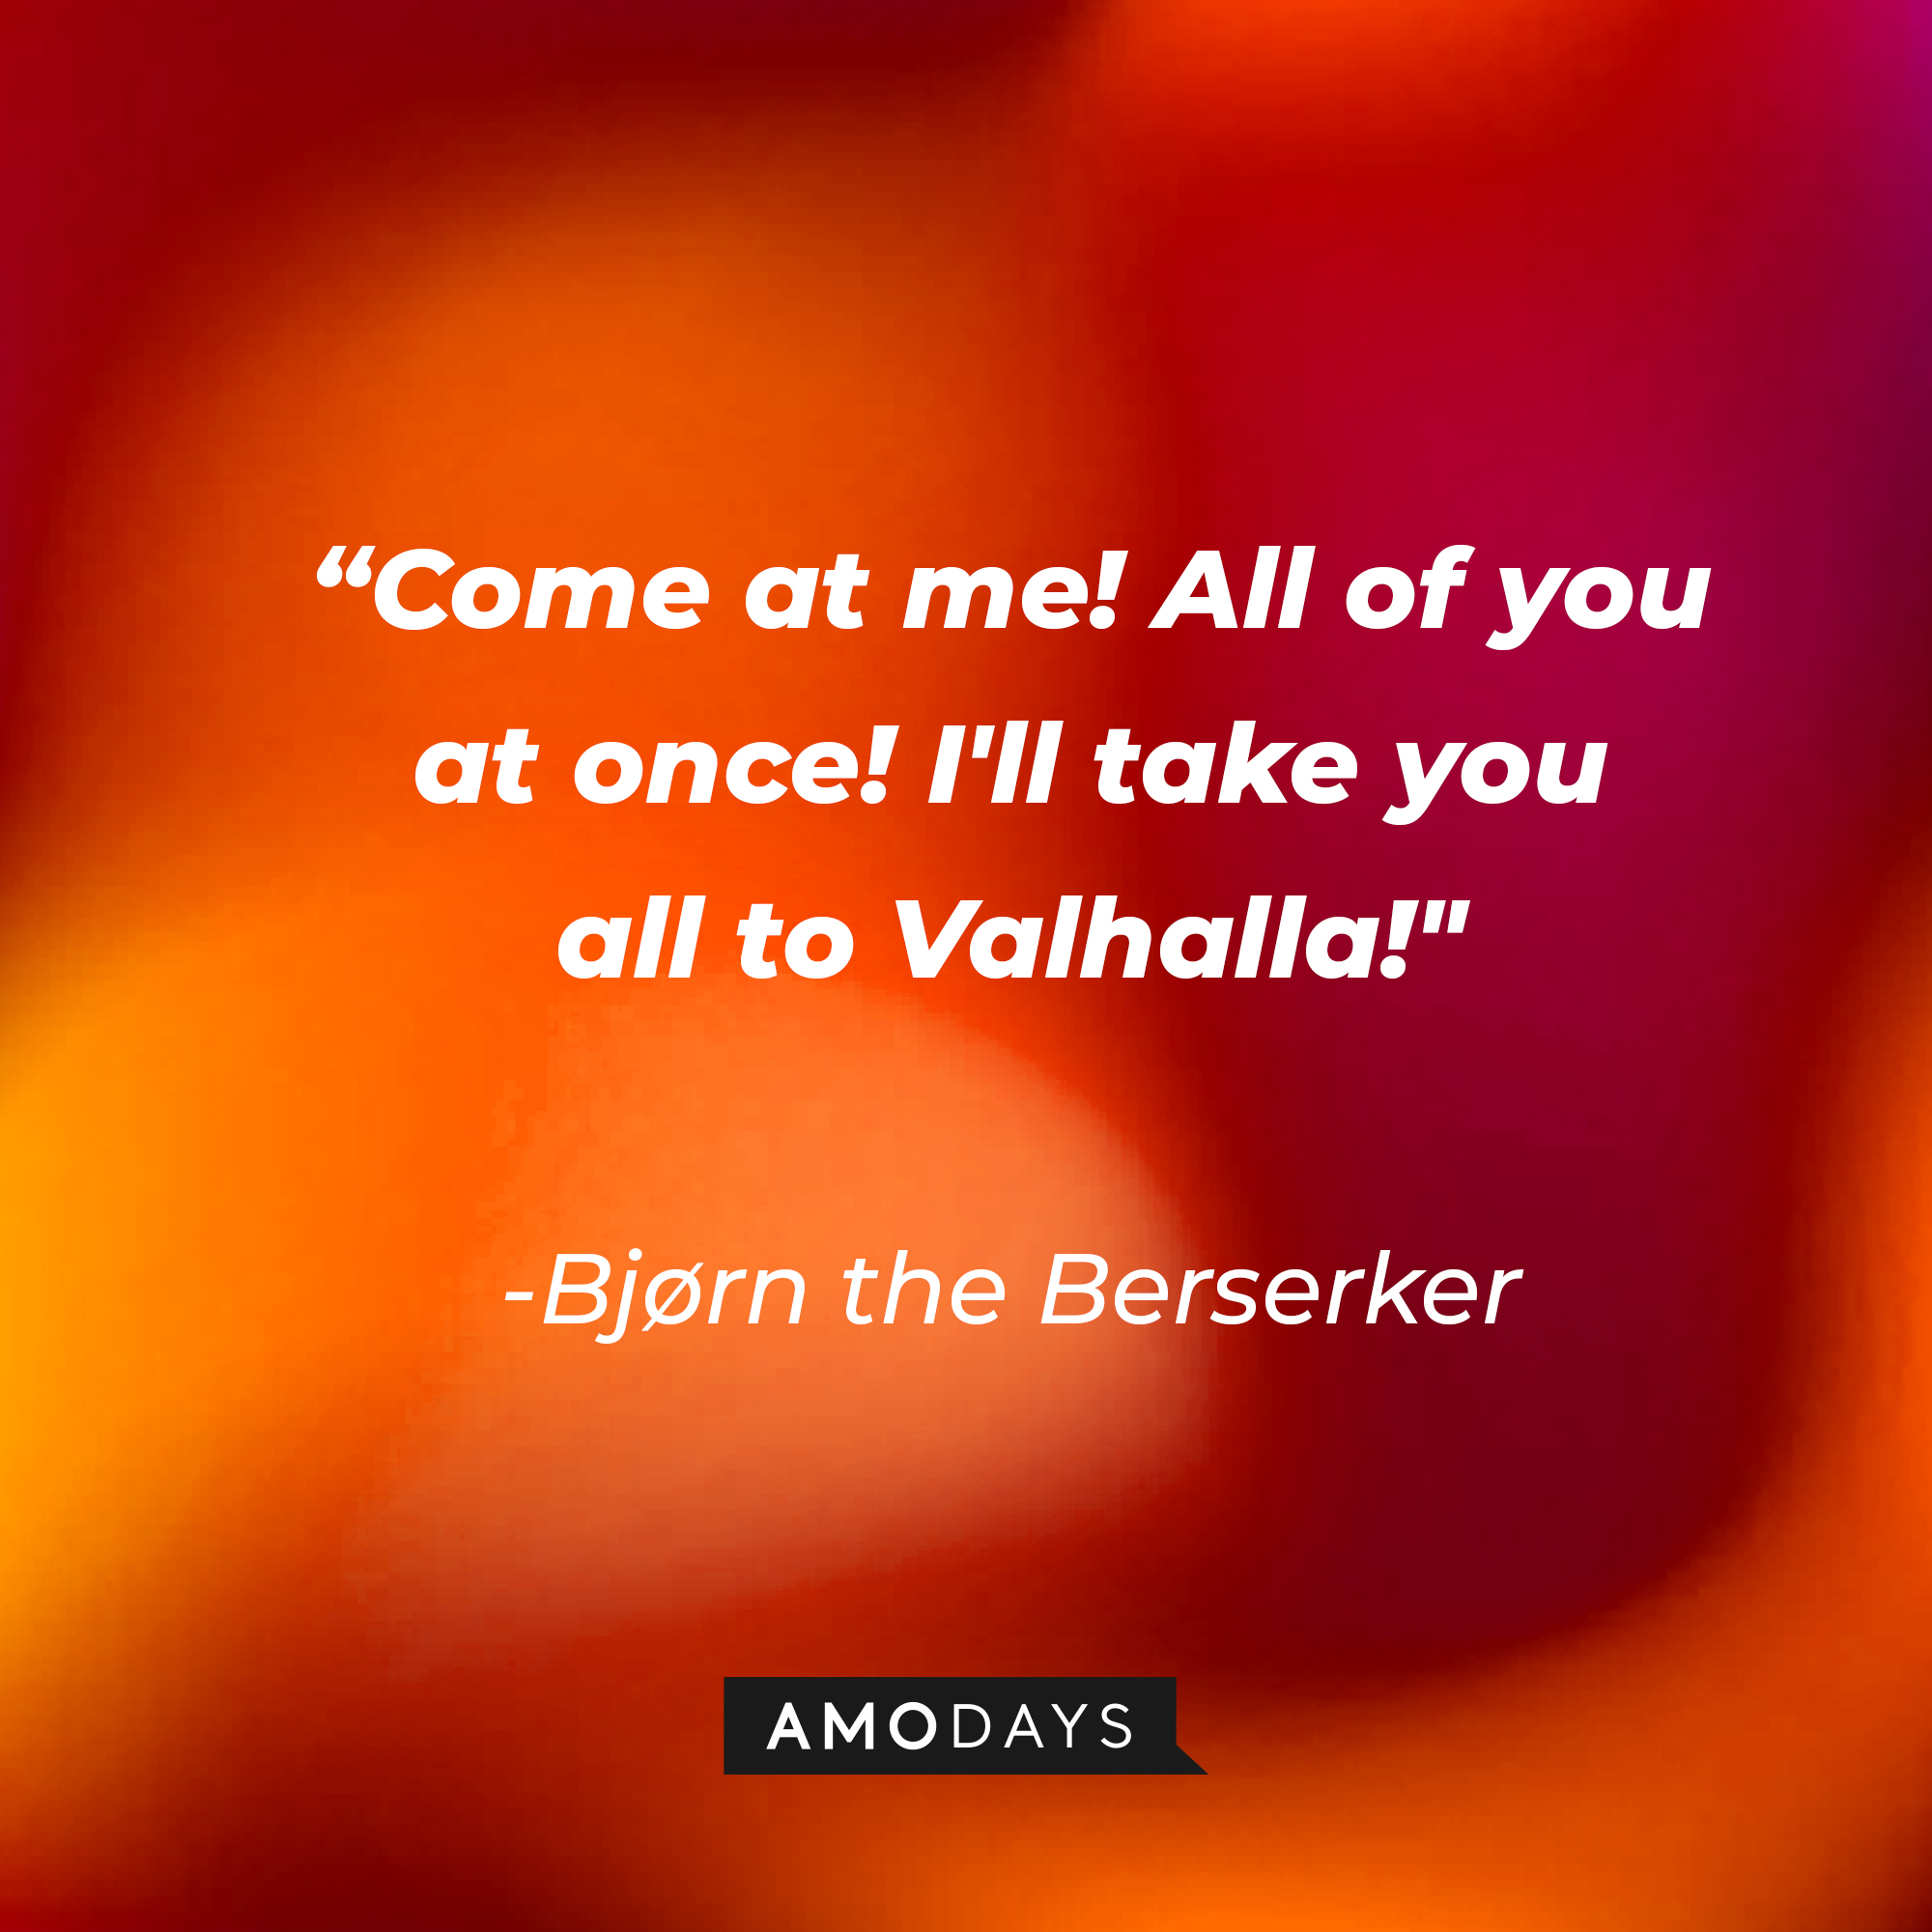 Bjørn the Berserker’s quote: “Come at me! All of you at once! I'll take you all to Valhalla!" | Source: Amodays